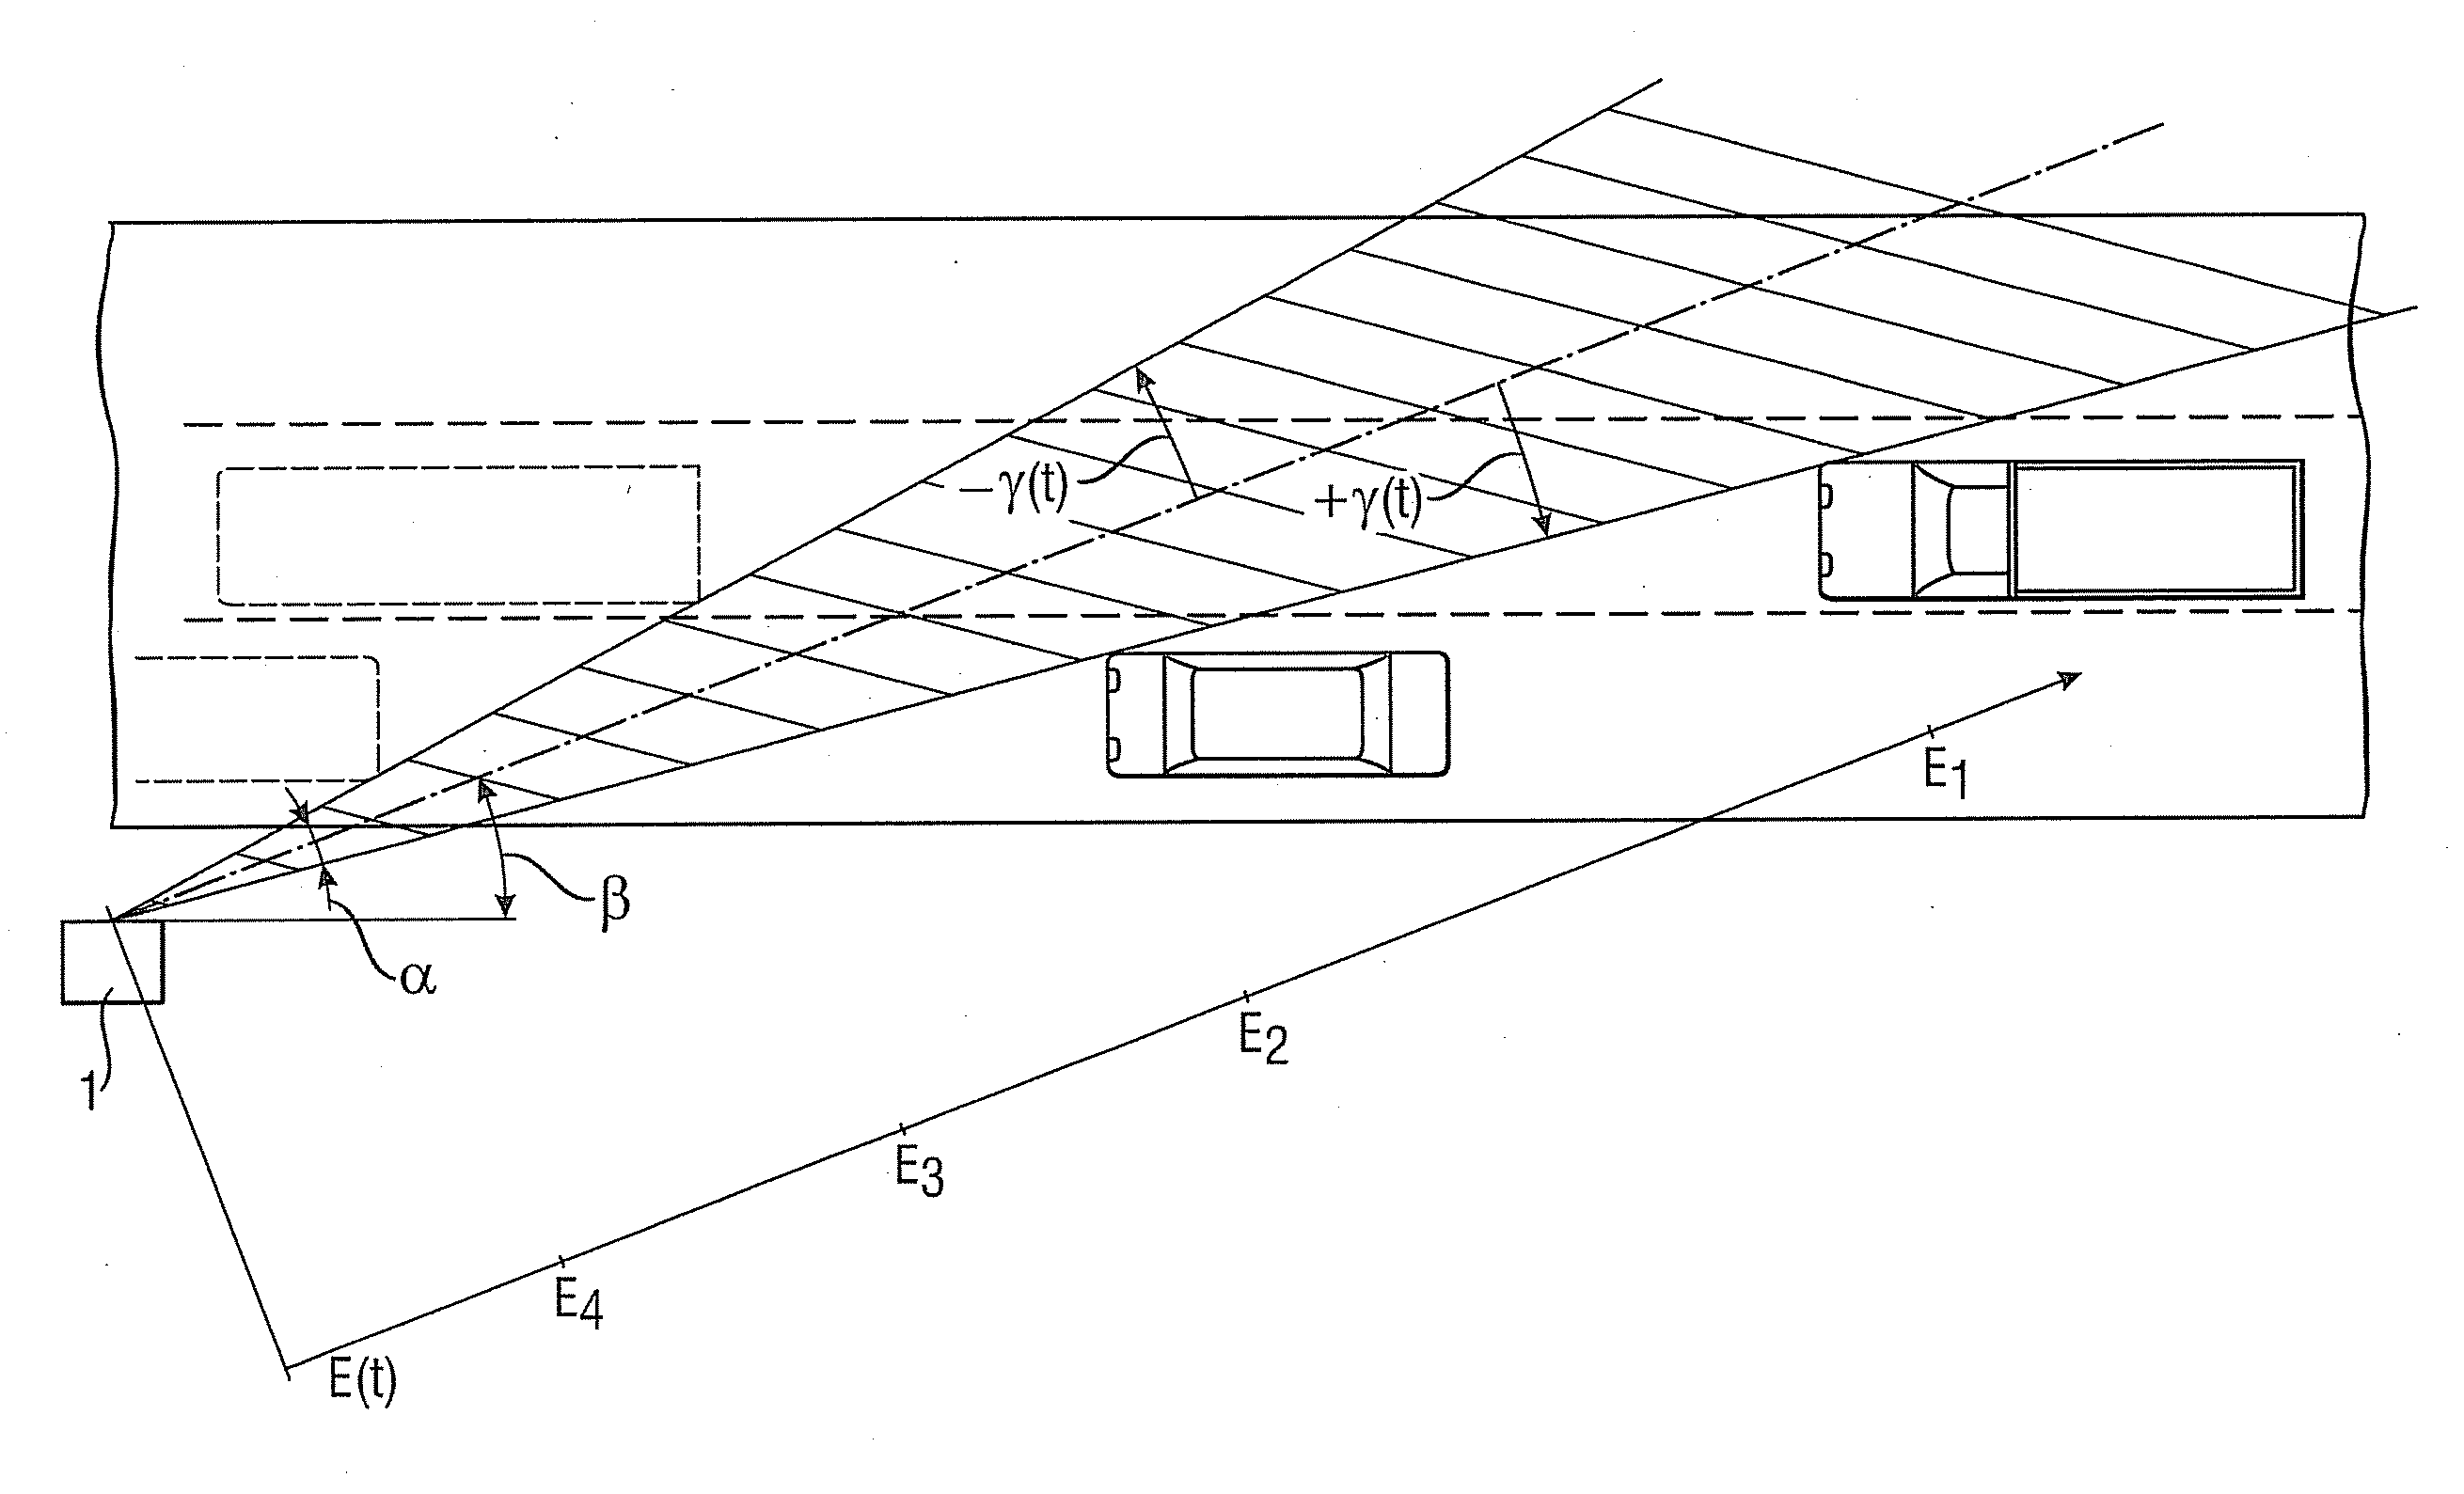 Method of Verifiably Detecting the Speed of a Vehicle